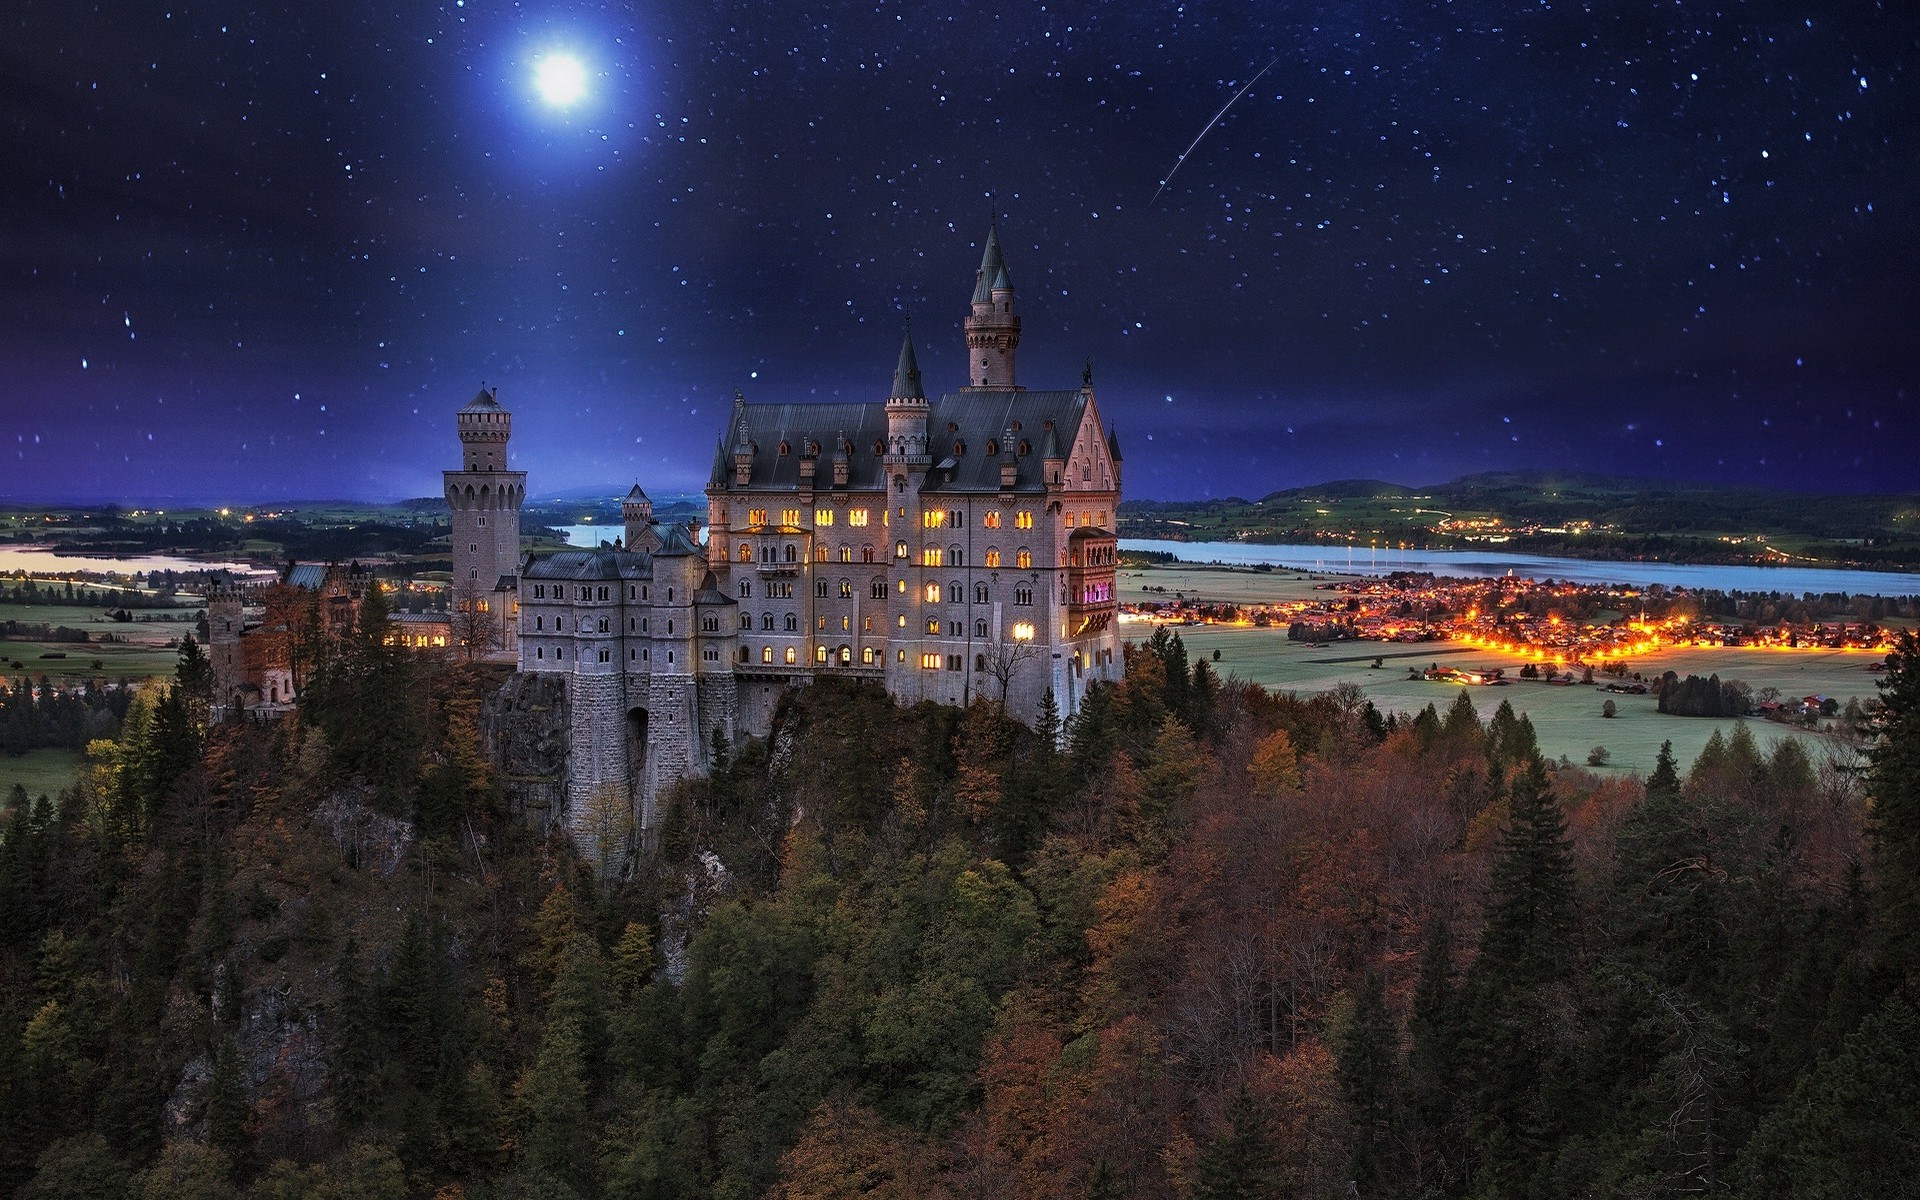 landscape, Nature, Neuschwanstein Castle, Germany, Starry Night, Moon, Valley, Trees, Lights, Architecture, Village, Palace, Fall Wallpaper